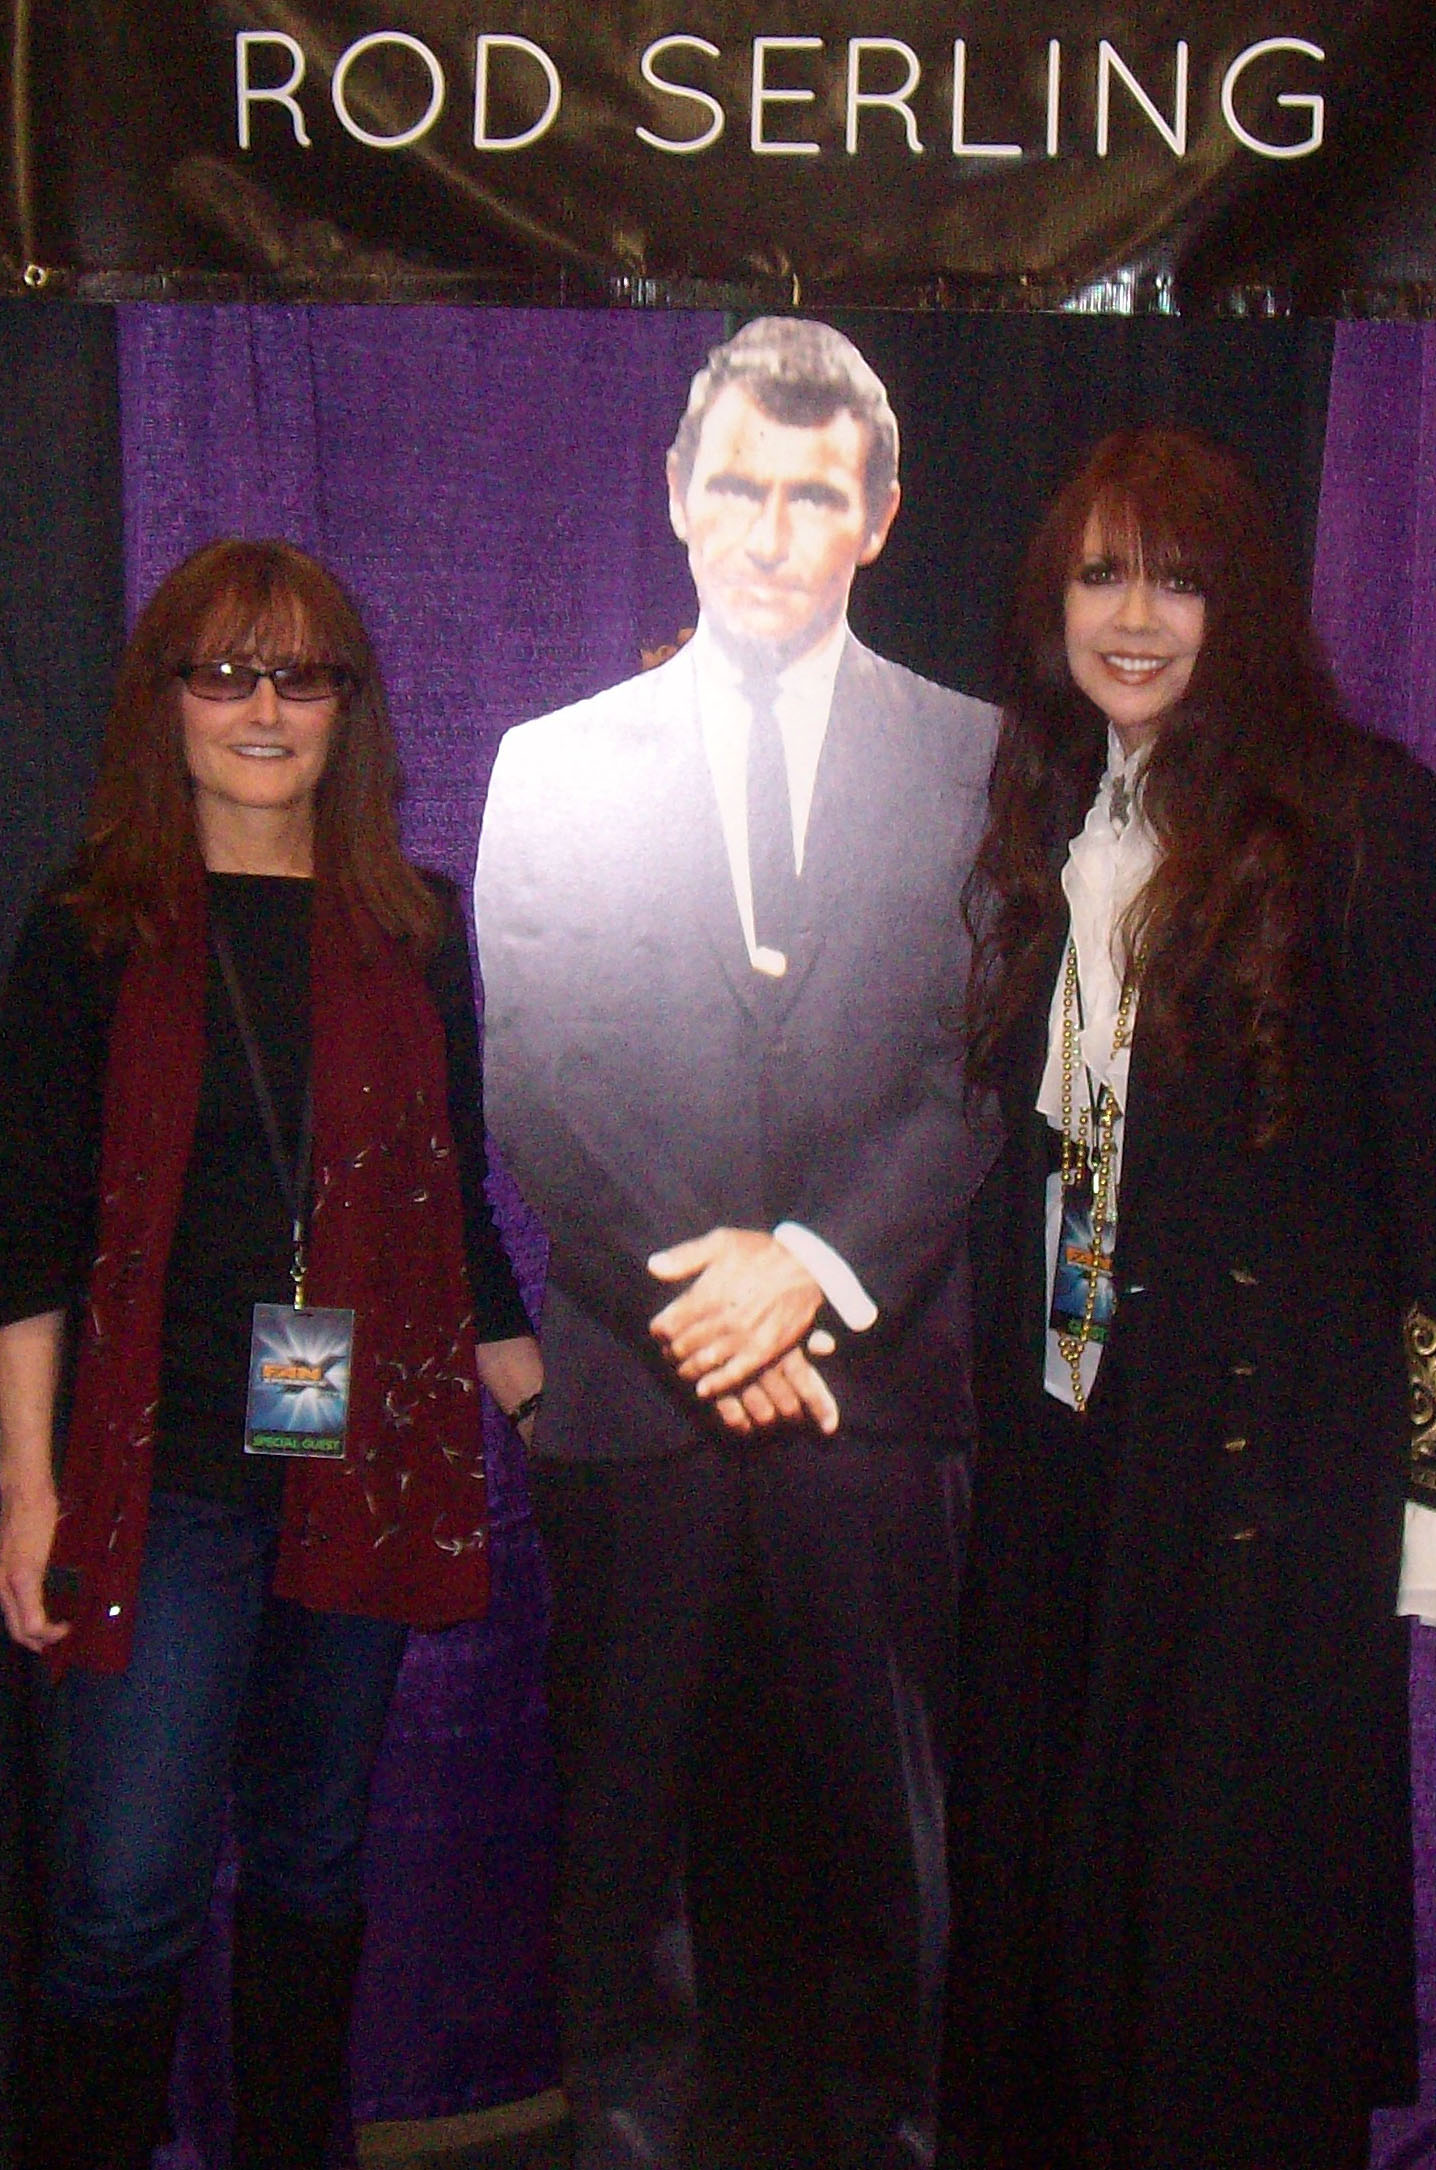 Twilight Zone - Rod Serling's daughter, Anne Serling and Deborah Reed - Special guests at Comic Con